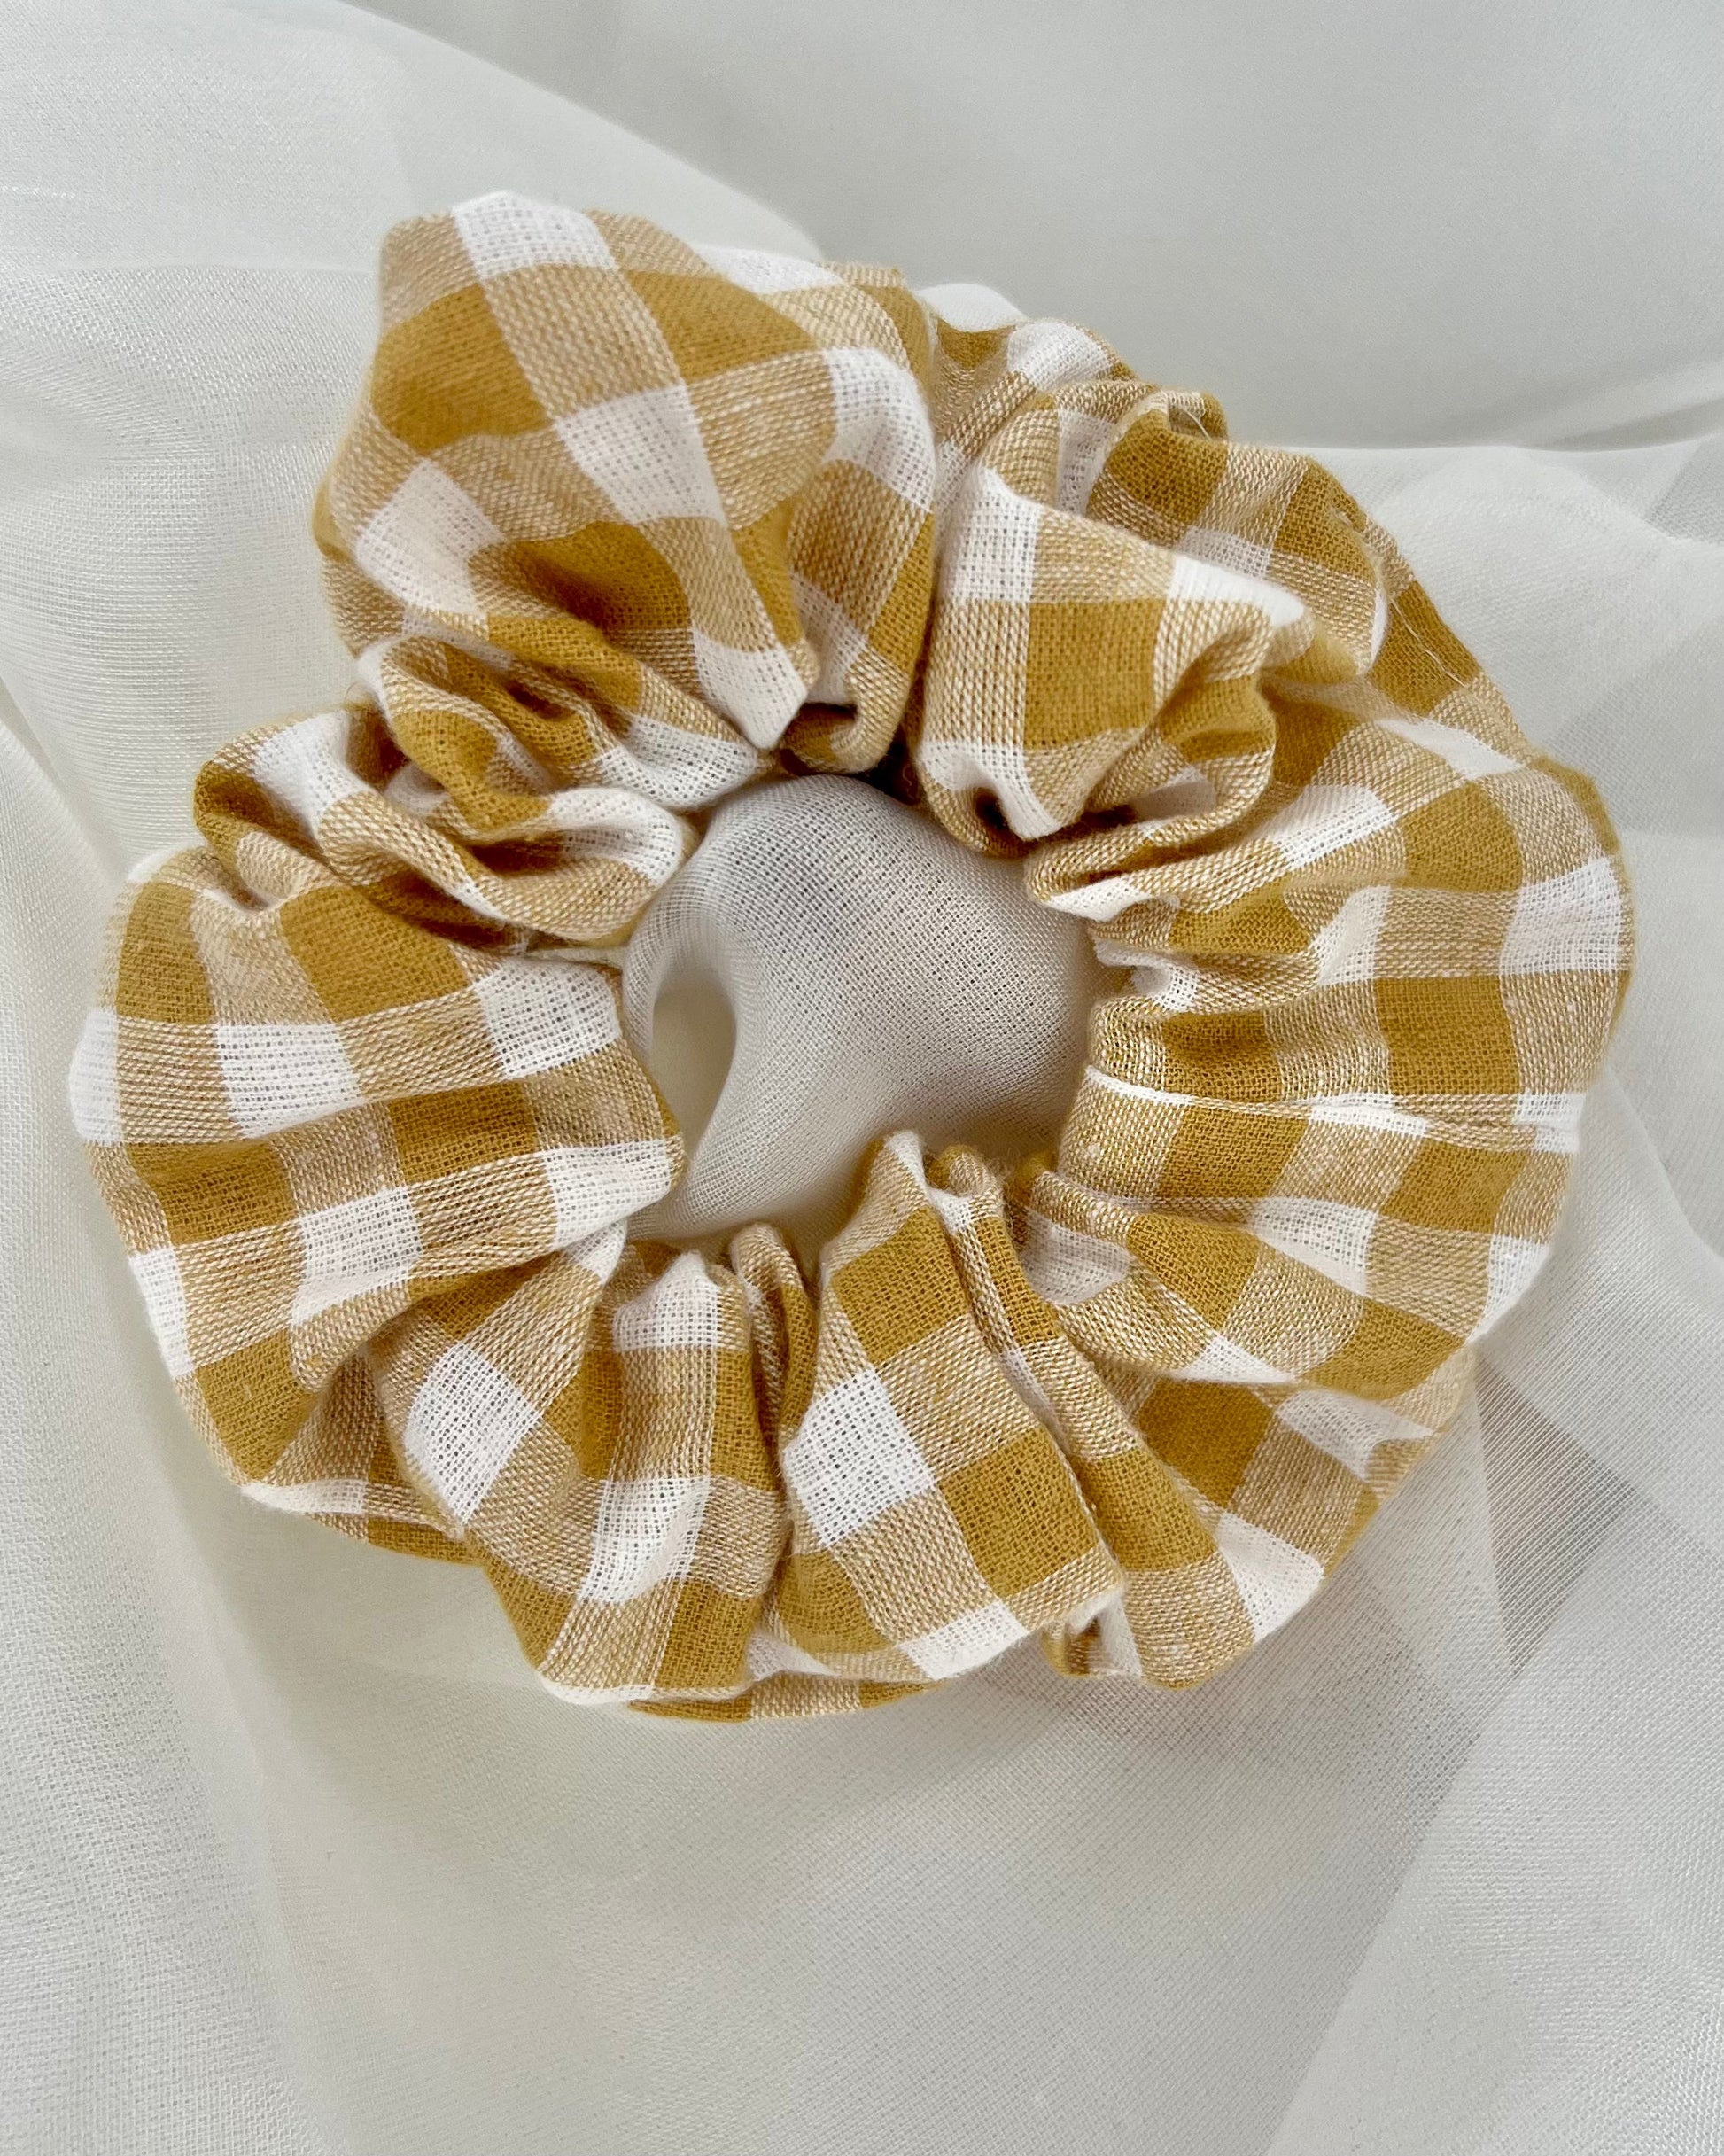 Sage + Stone Handmade Neutral Boho Scrunchies: Hand made in Bunbury WA by Sage + Stone, these beautiful pieces bring a sweet neutral boho vibe to your wardrobe

Handmade with various fabrics
Please see photos for - Ciao Bella Dresses 